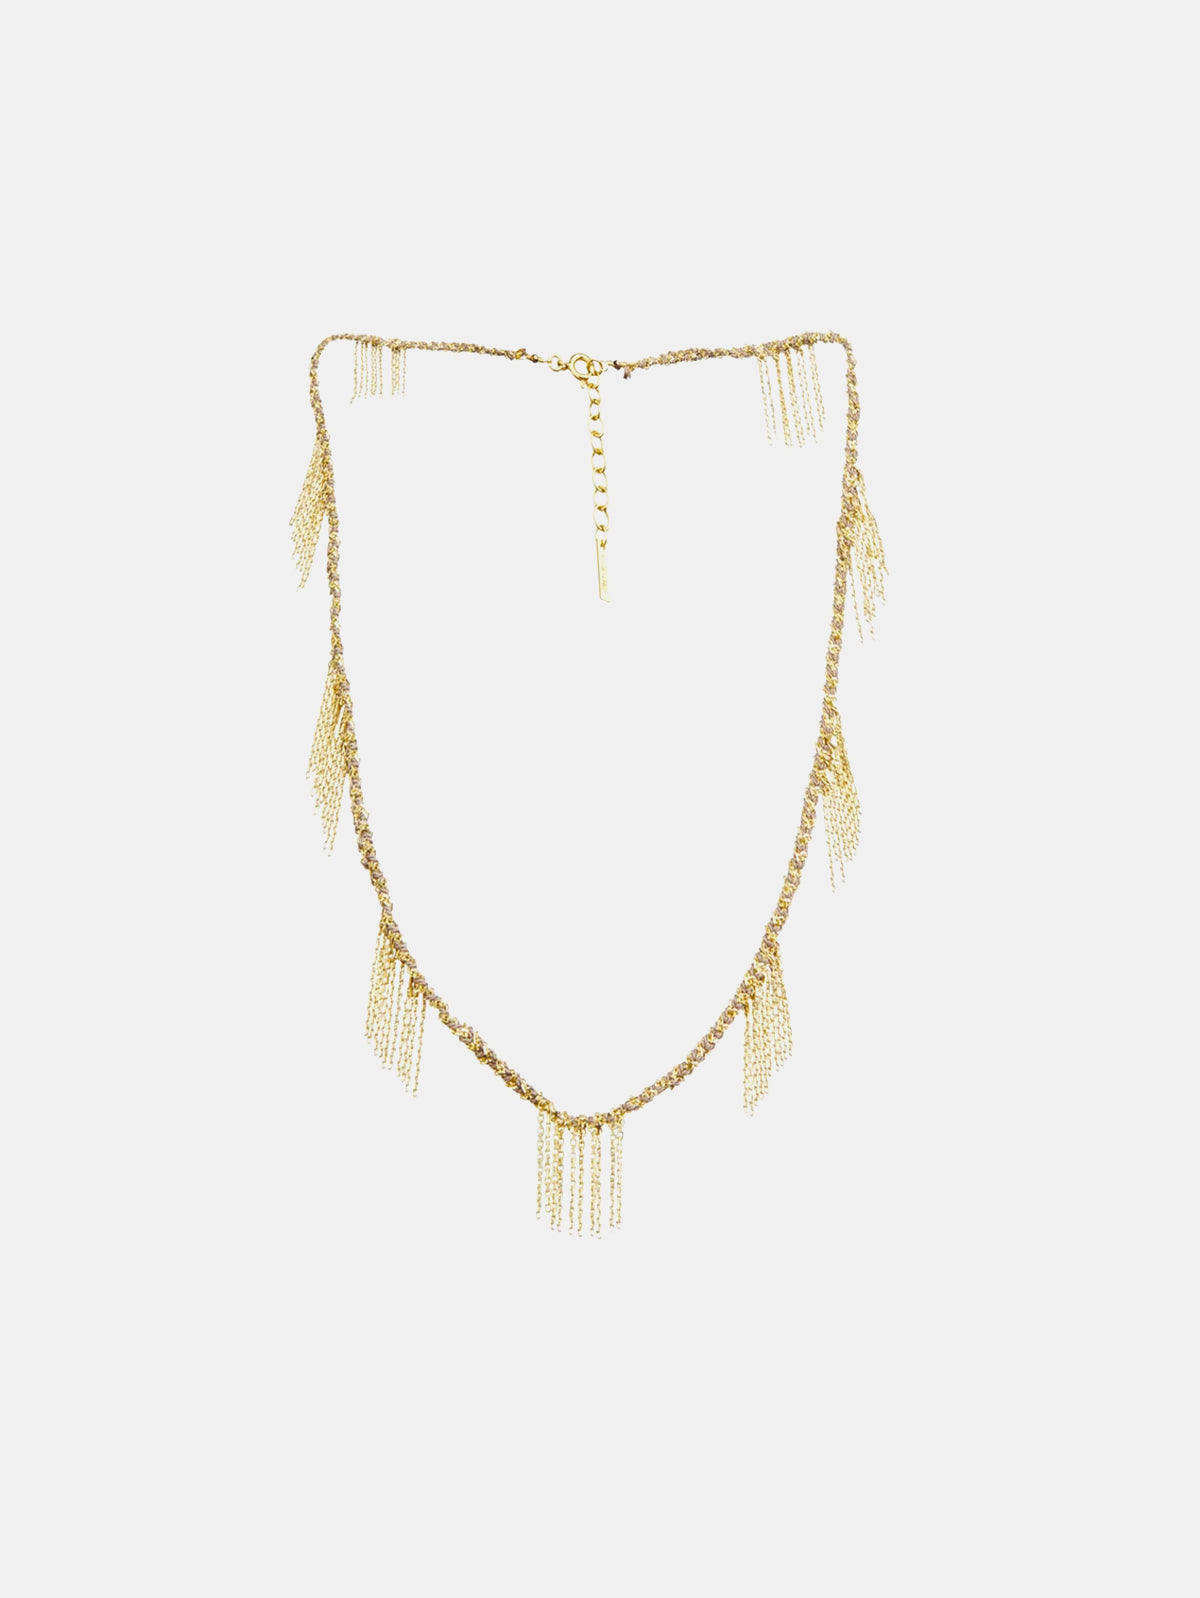 Marie Laure Chamorel 651 Necklace in Gold Grey